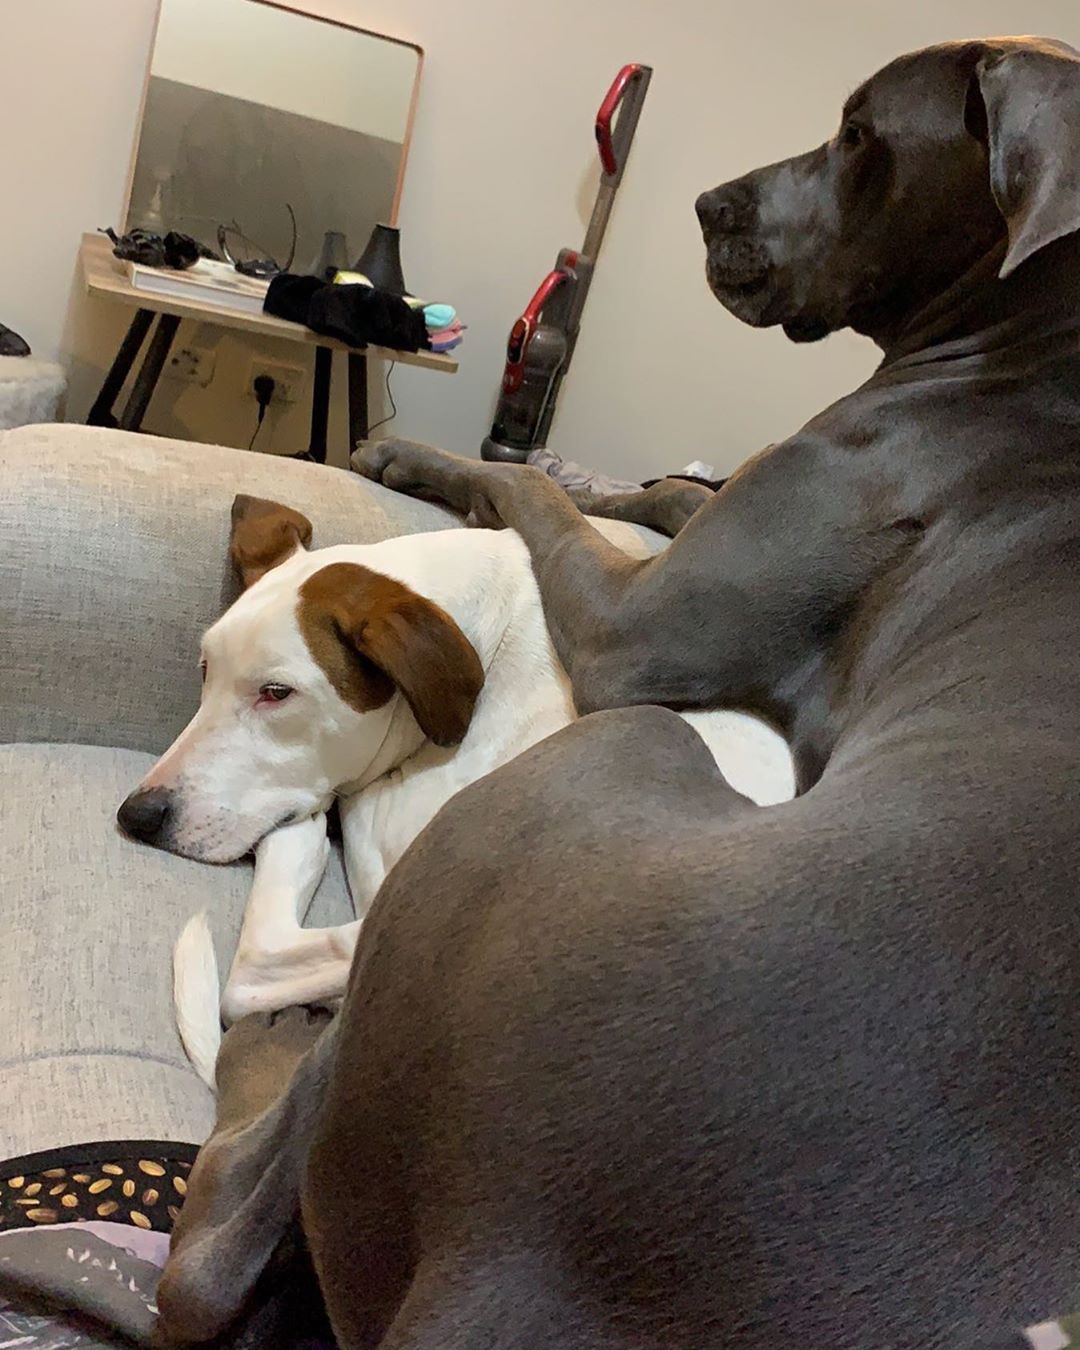 A Great Dane lying on top of a dog in the couch